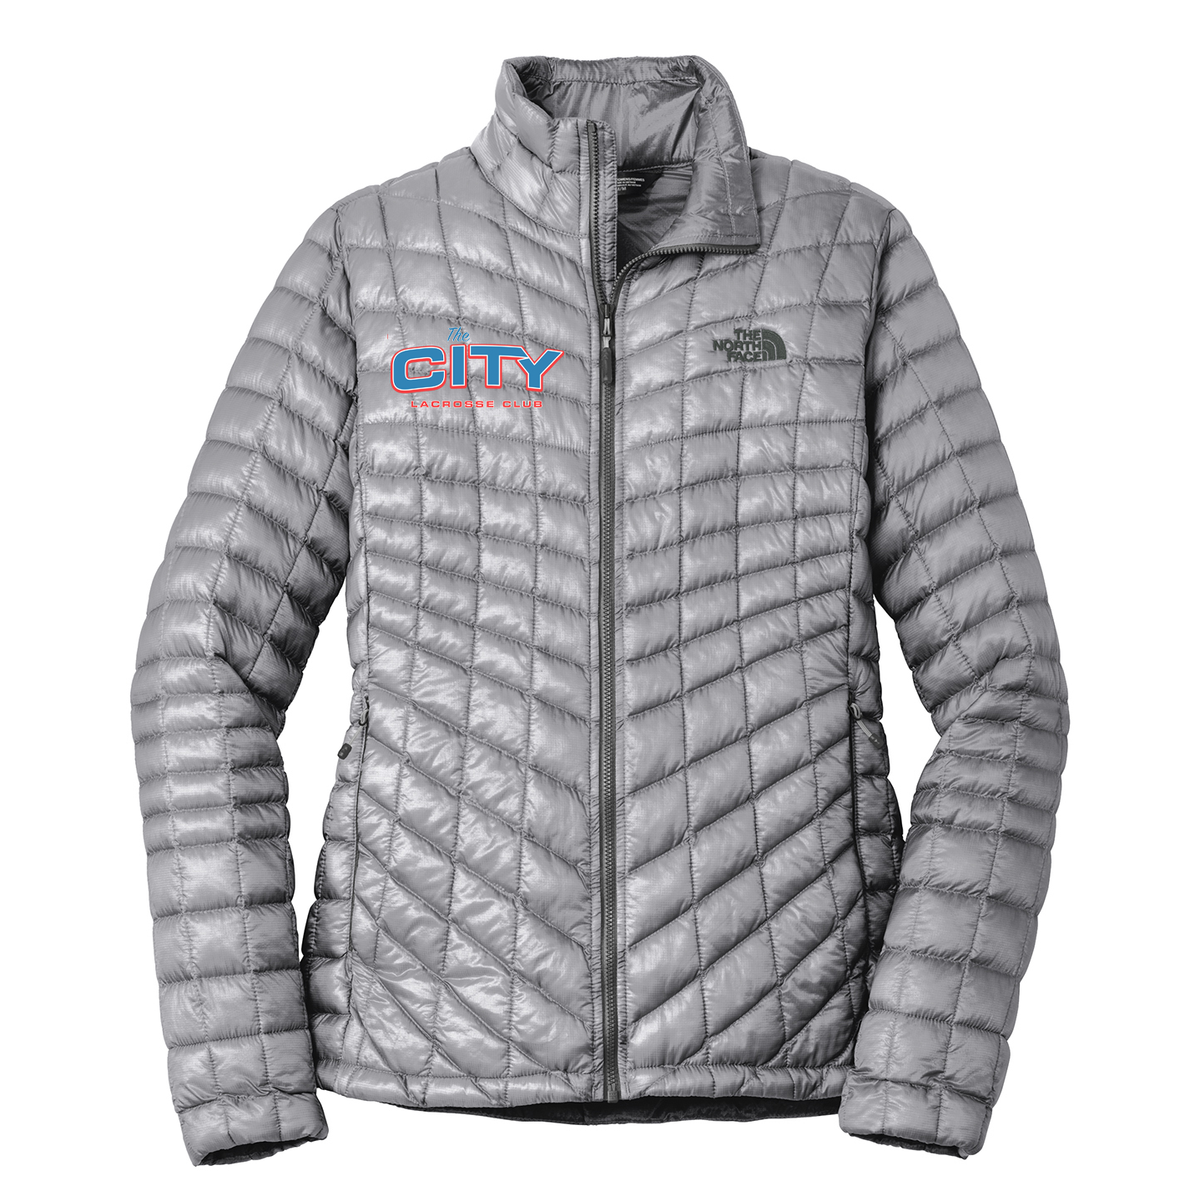 OKC Lacrosse Club The North Face Ladies ThermoBall Jacket